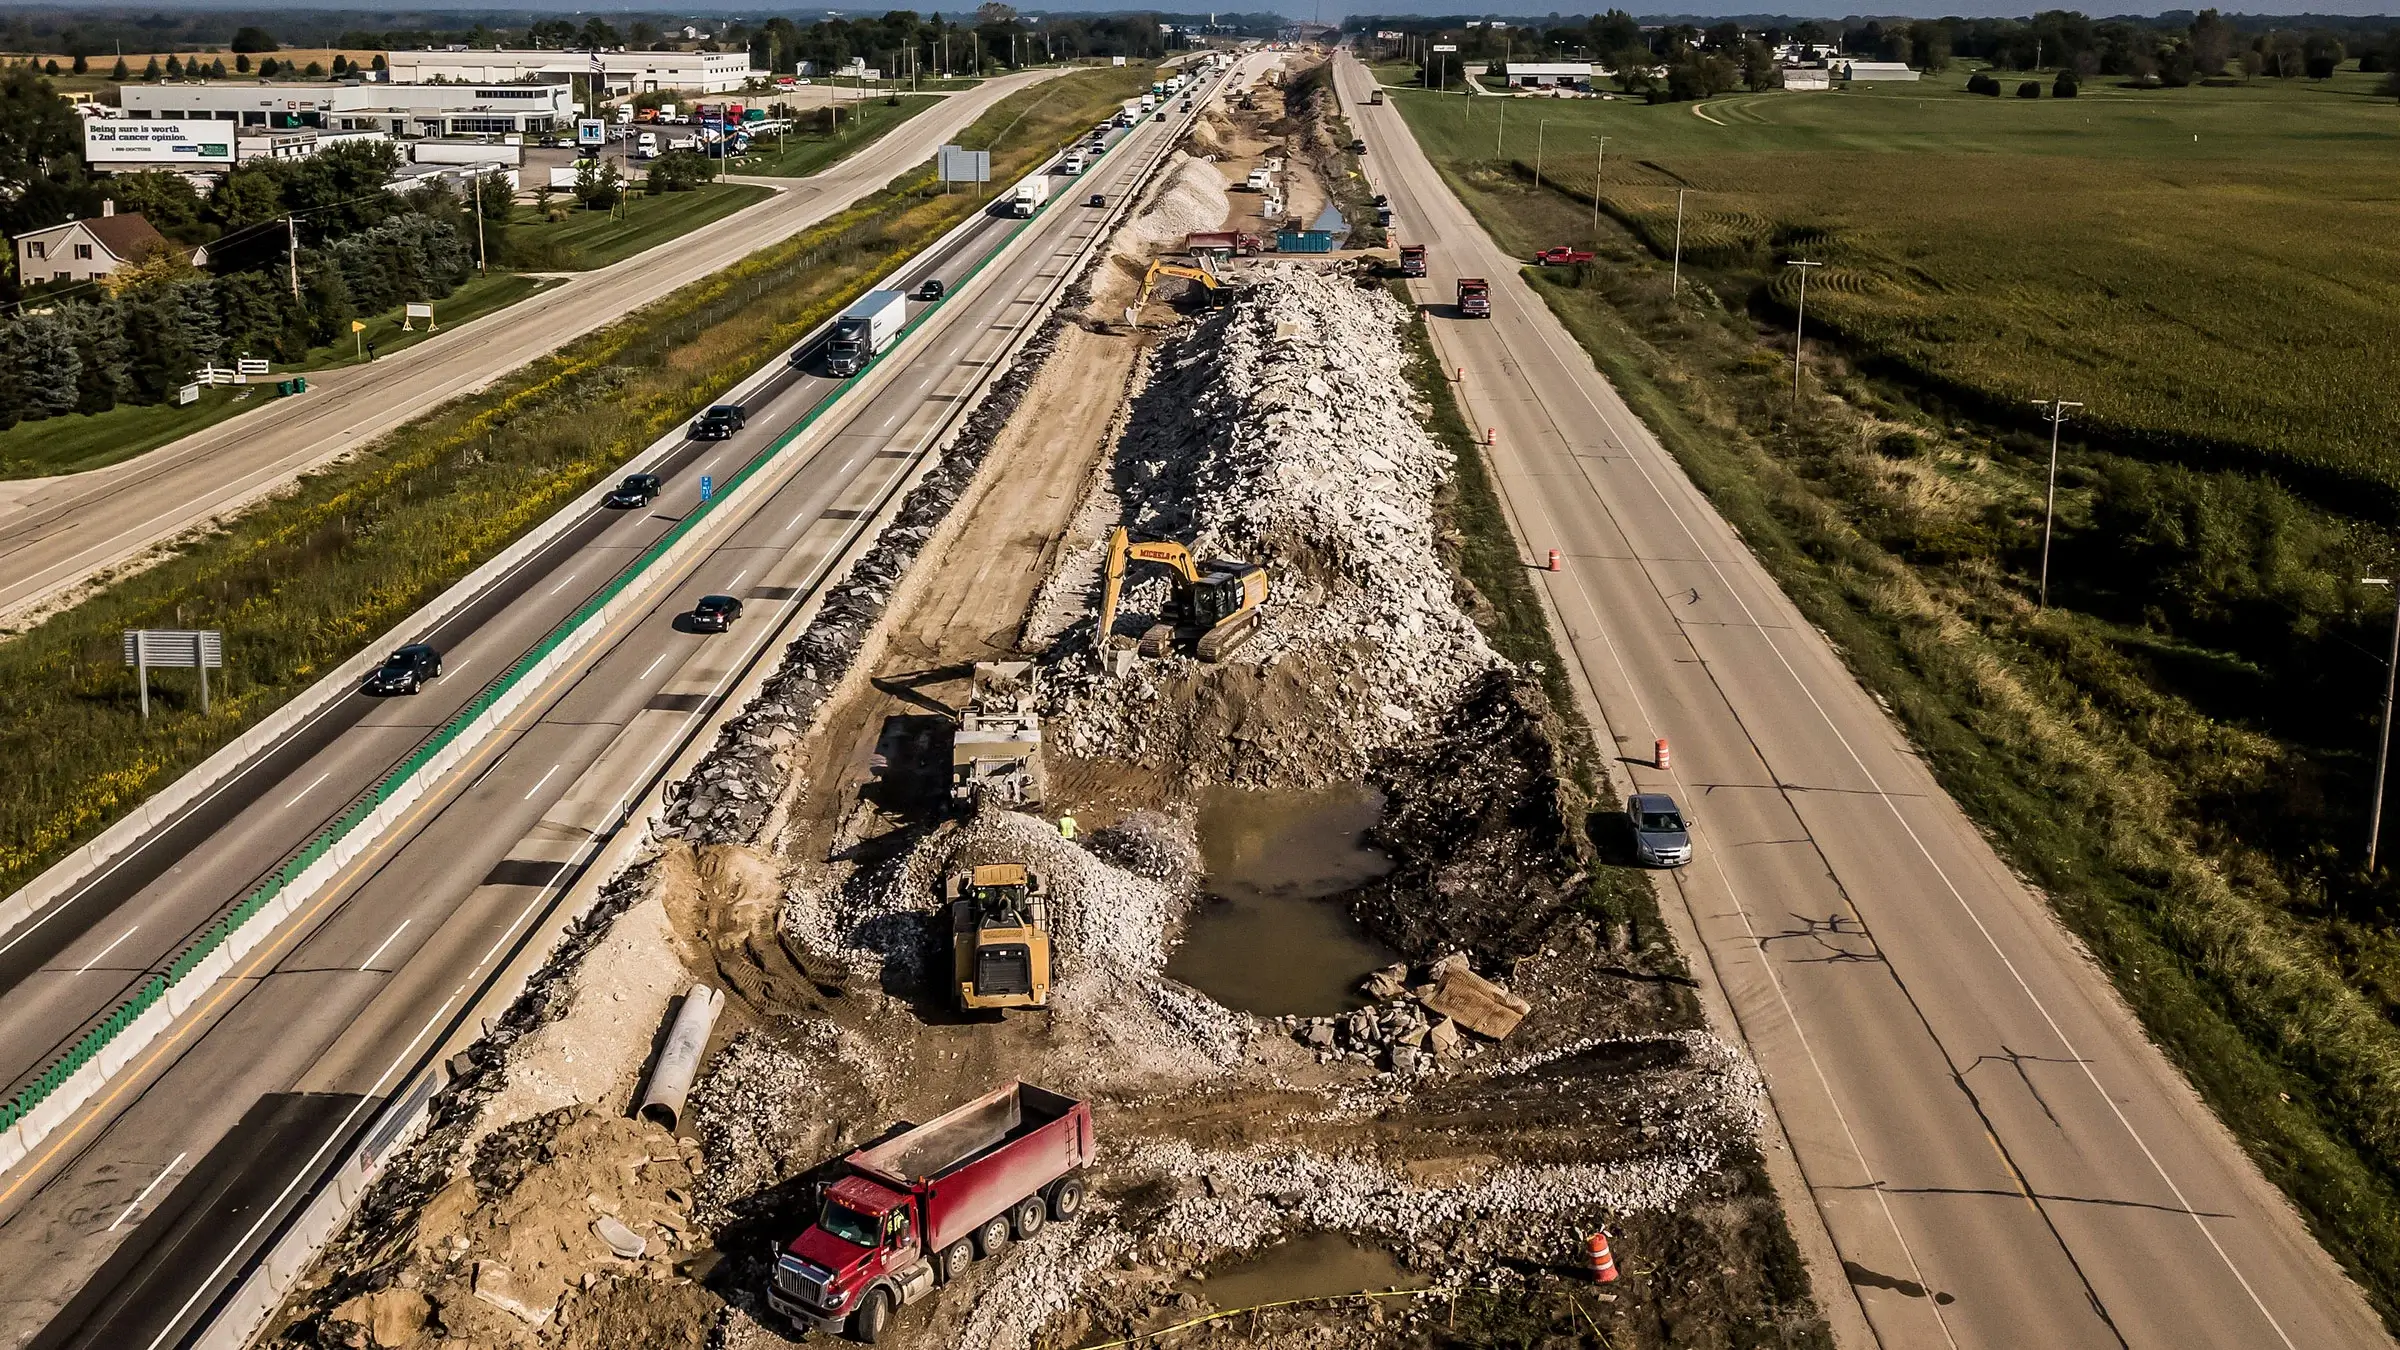 Excavators and dump trucks work to remove crushed aggregates from between two busy highways